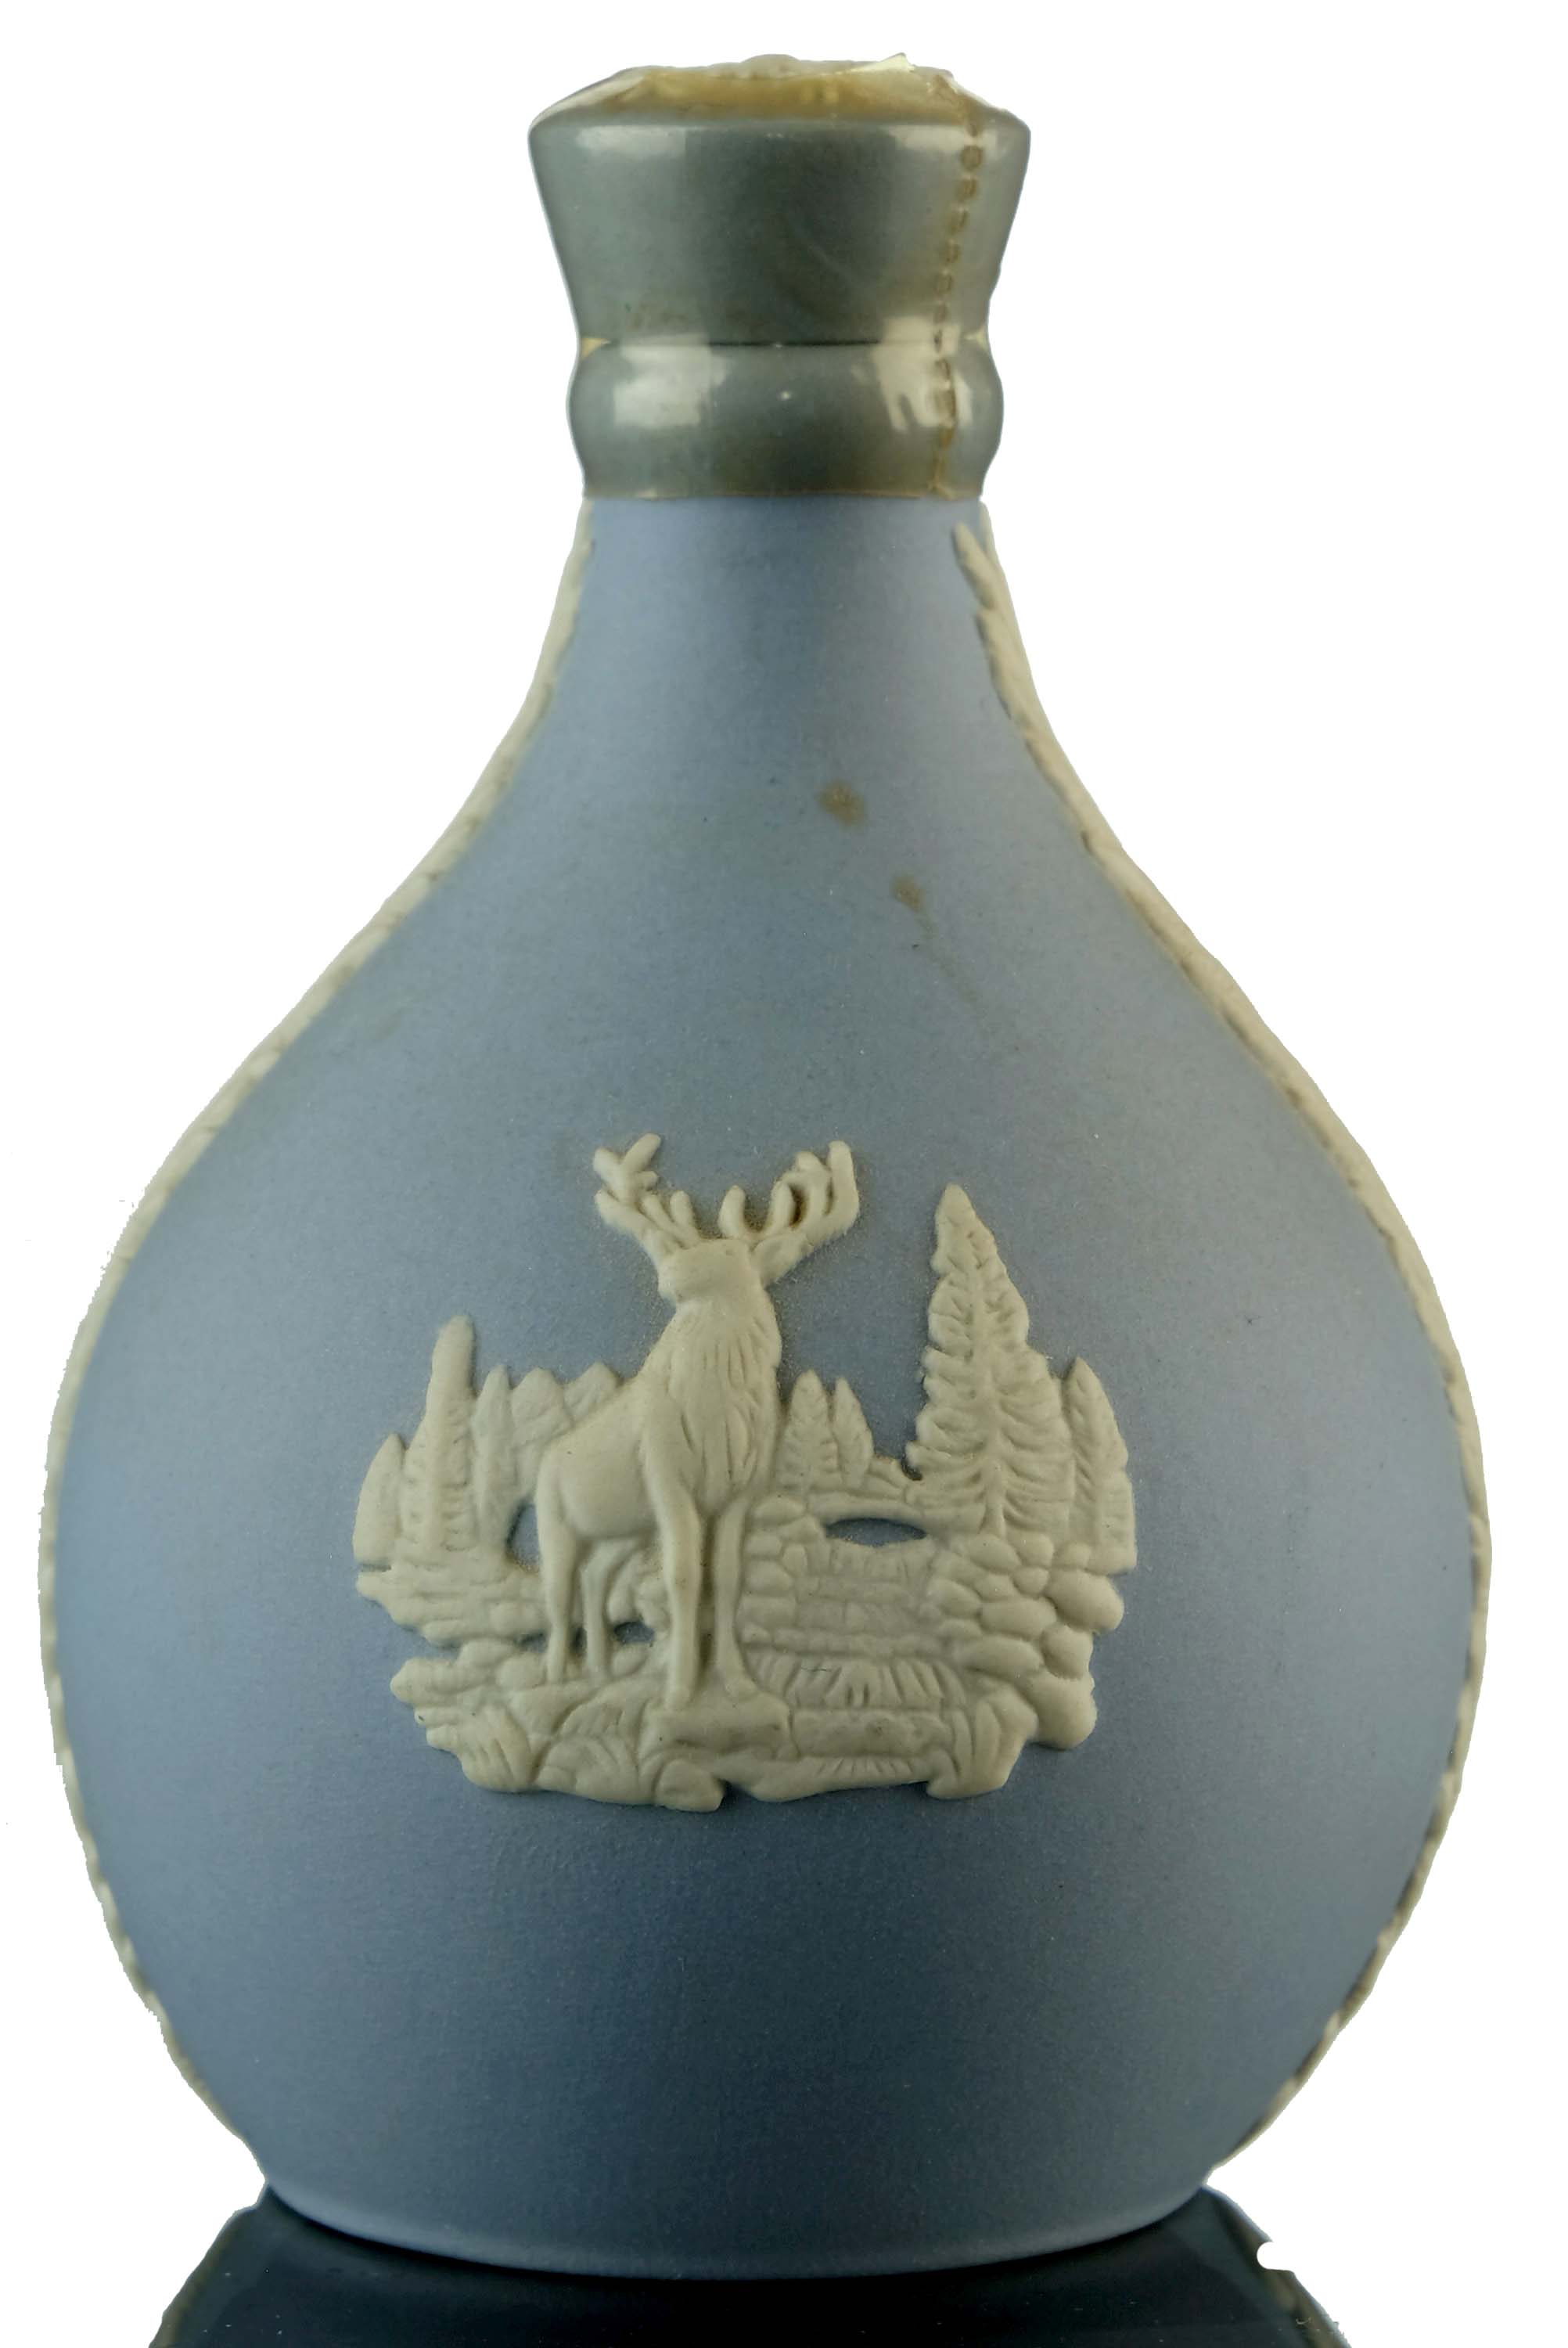 Glenfiddich 21 Year Old - Wedgwood Decanter Miniature